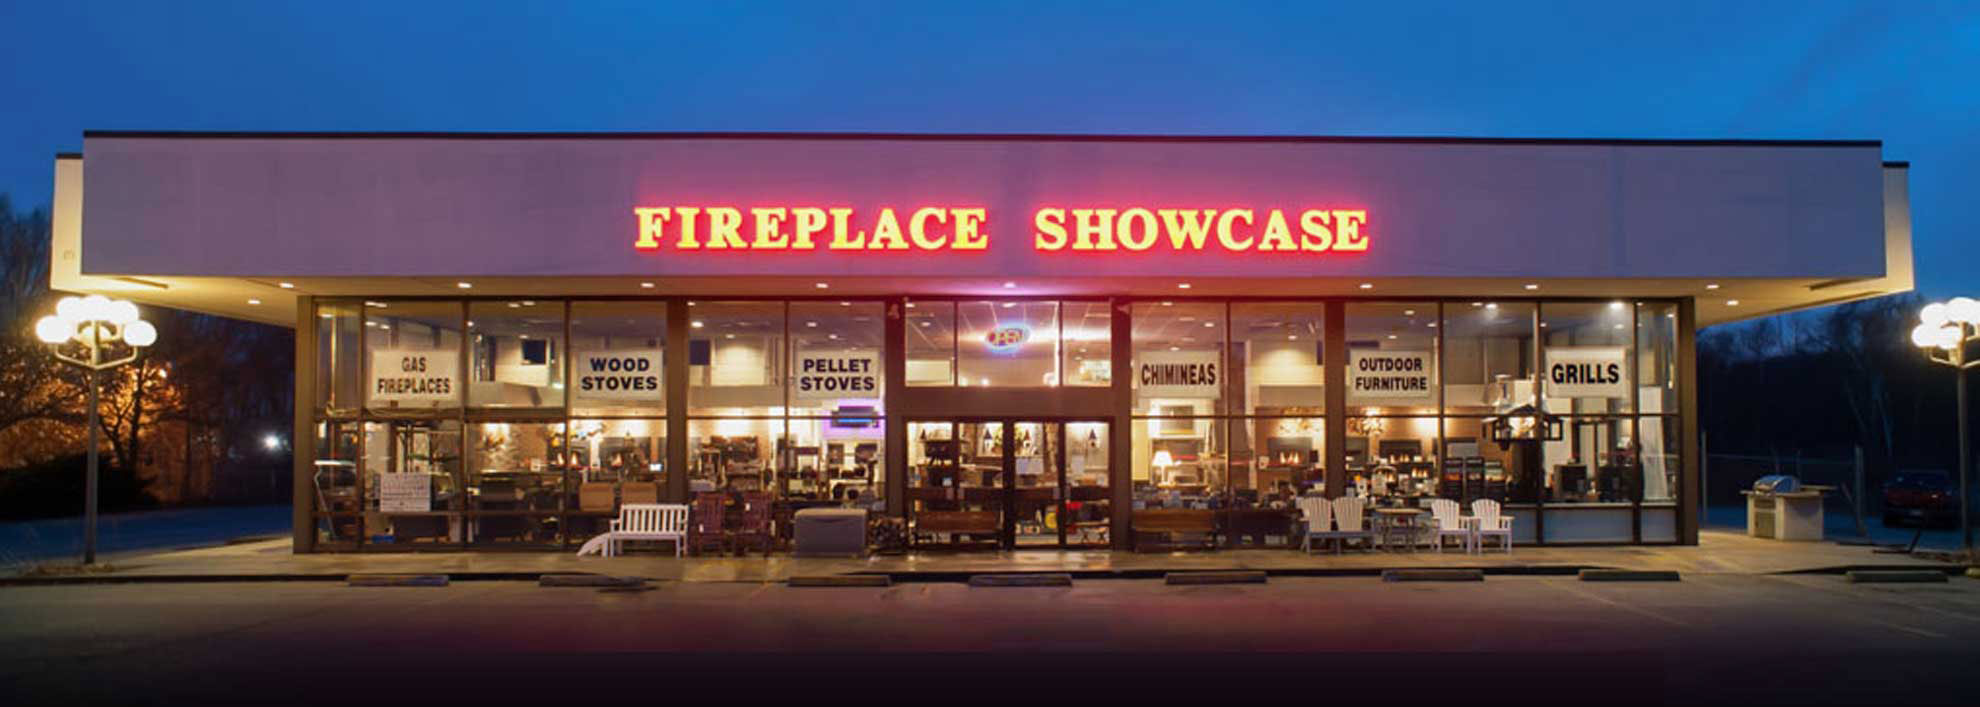 The Fireplace Showcase Building or Showroom